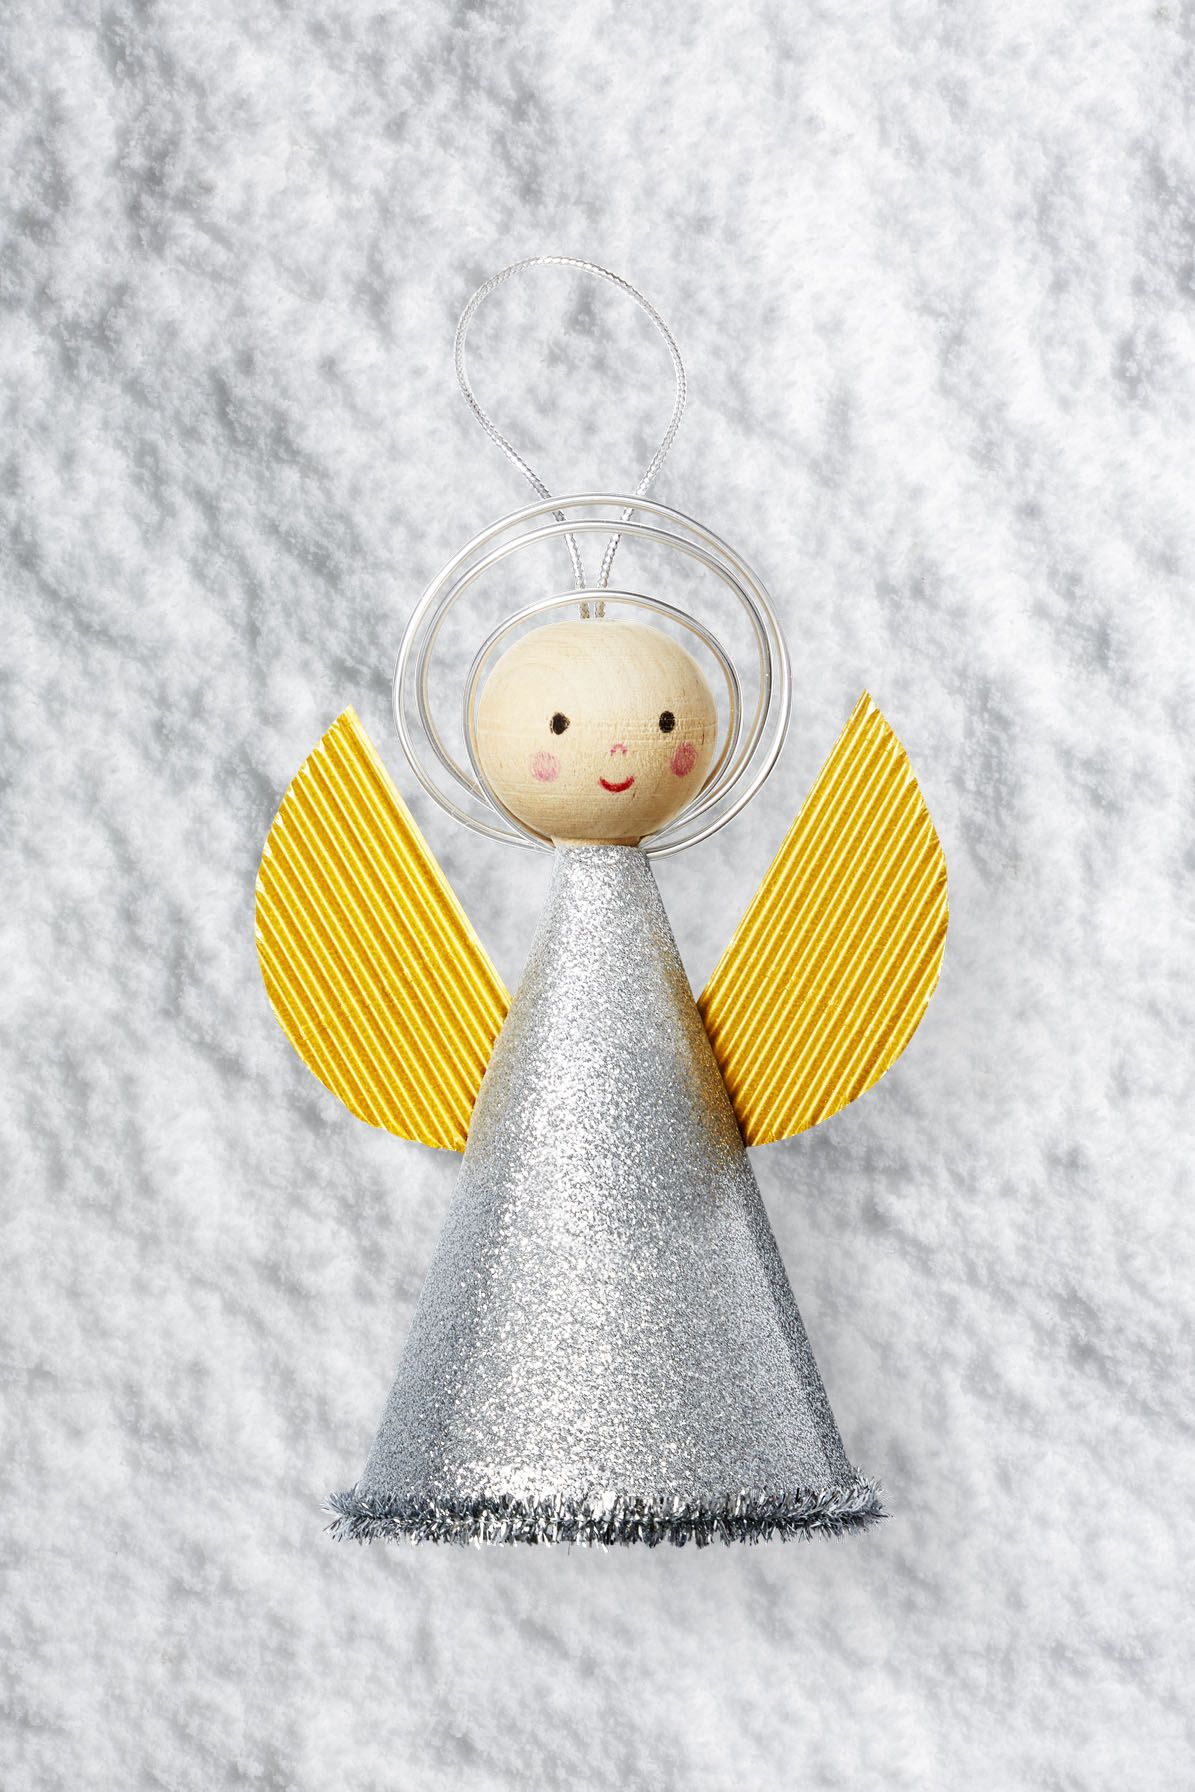 Make your own angel Craft kit to make copper angel Christmas tree decoration kit